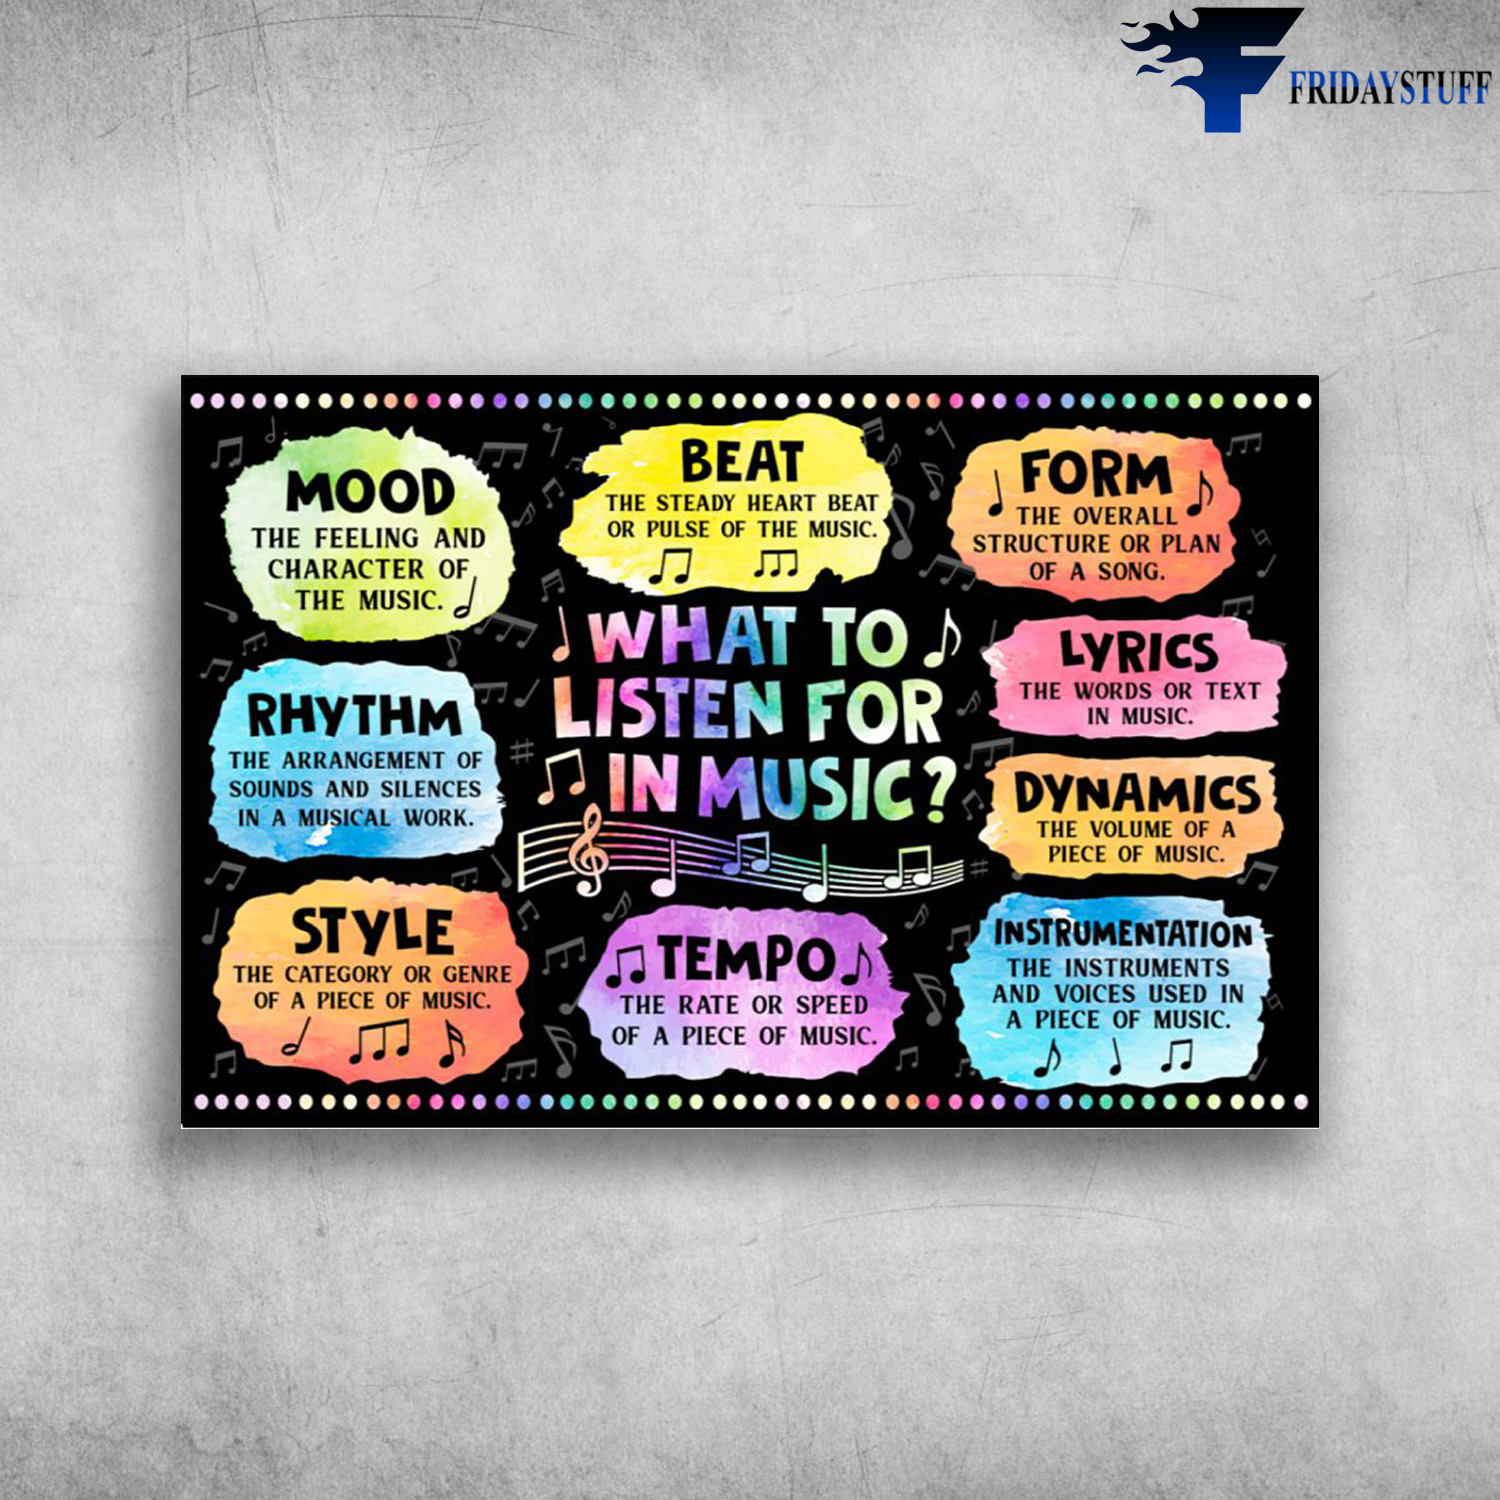 Knowledge About Music - What To Listen For In Music, Mood The Feeling And Character Of The Music, Beat The Sready Heart Beat, Form The Overall Structure, Lyrics The Words Or Text In Music, Rhythm, Style, Tempo, Instrumentation